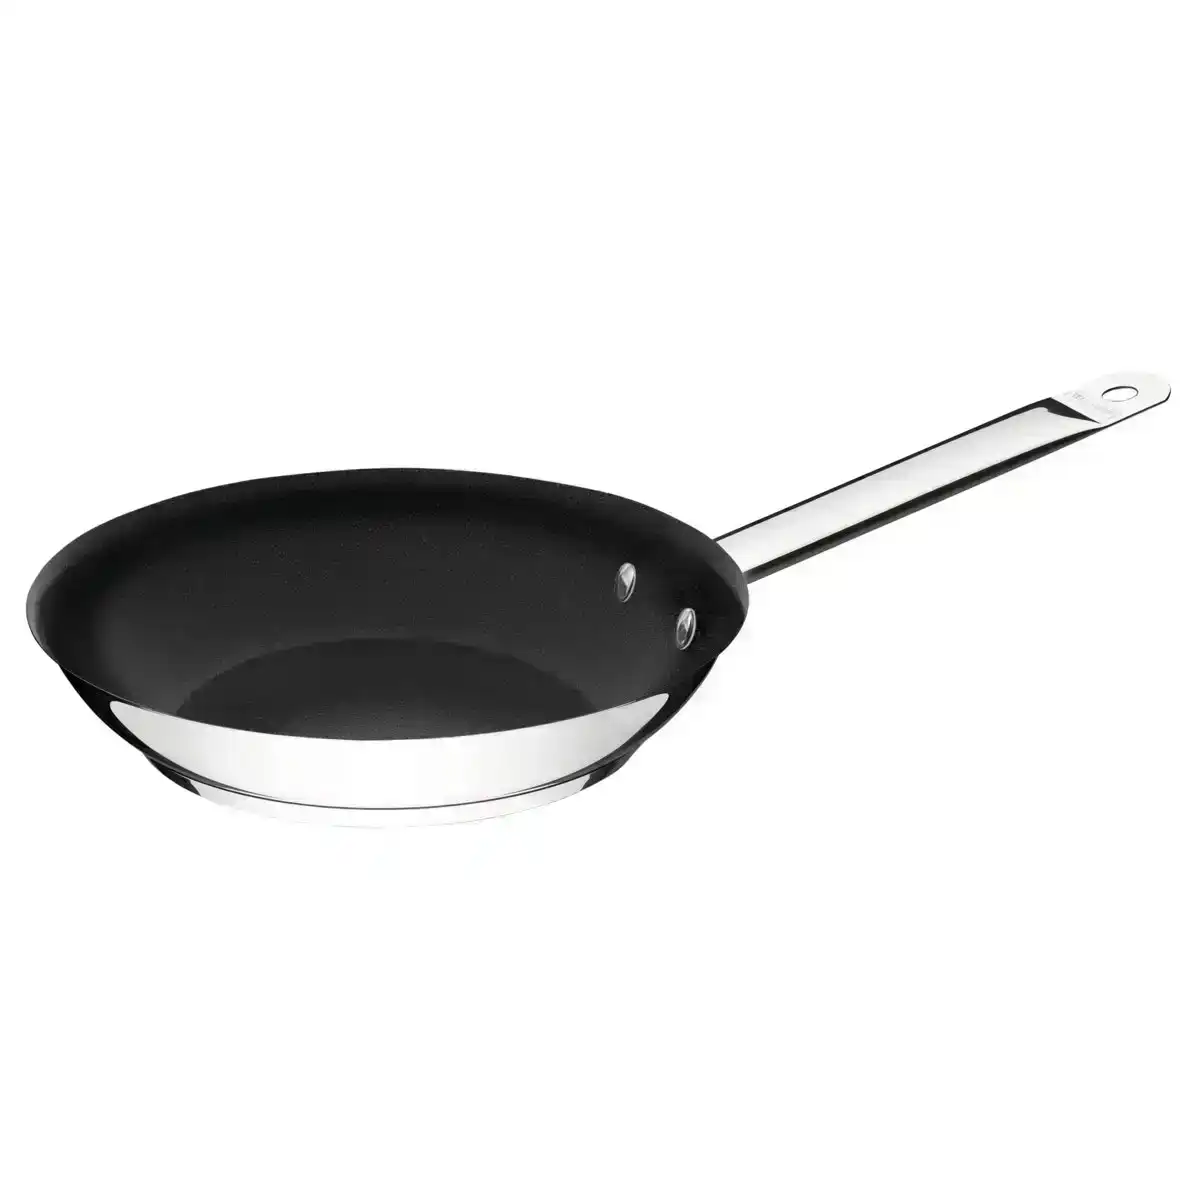 Tramontina Professional Non Stick Stainless Steel Frying Pan 30cm, 2.9L